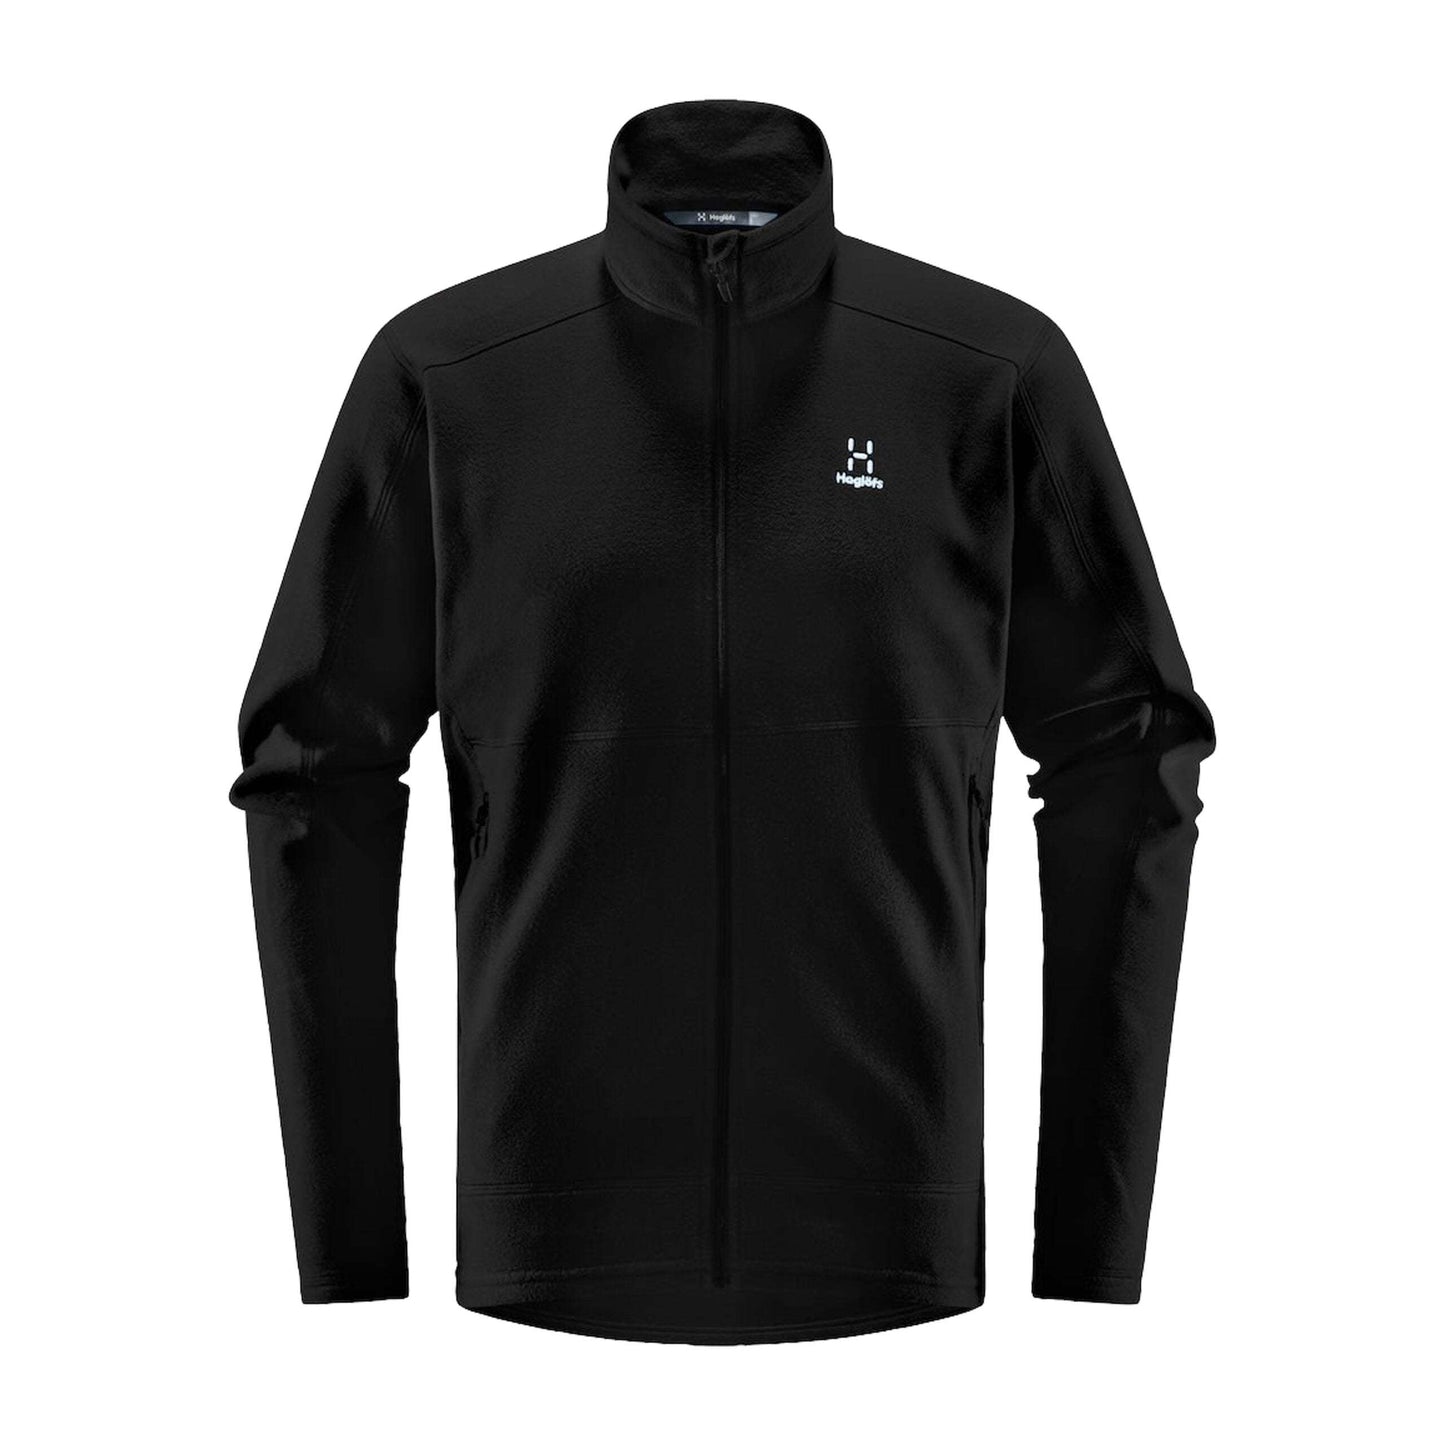 Haglofs Men’s Buteo Mid Jacket - The Luxury Promotional Gifts Company Limited